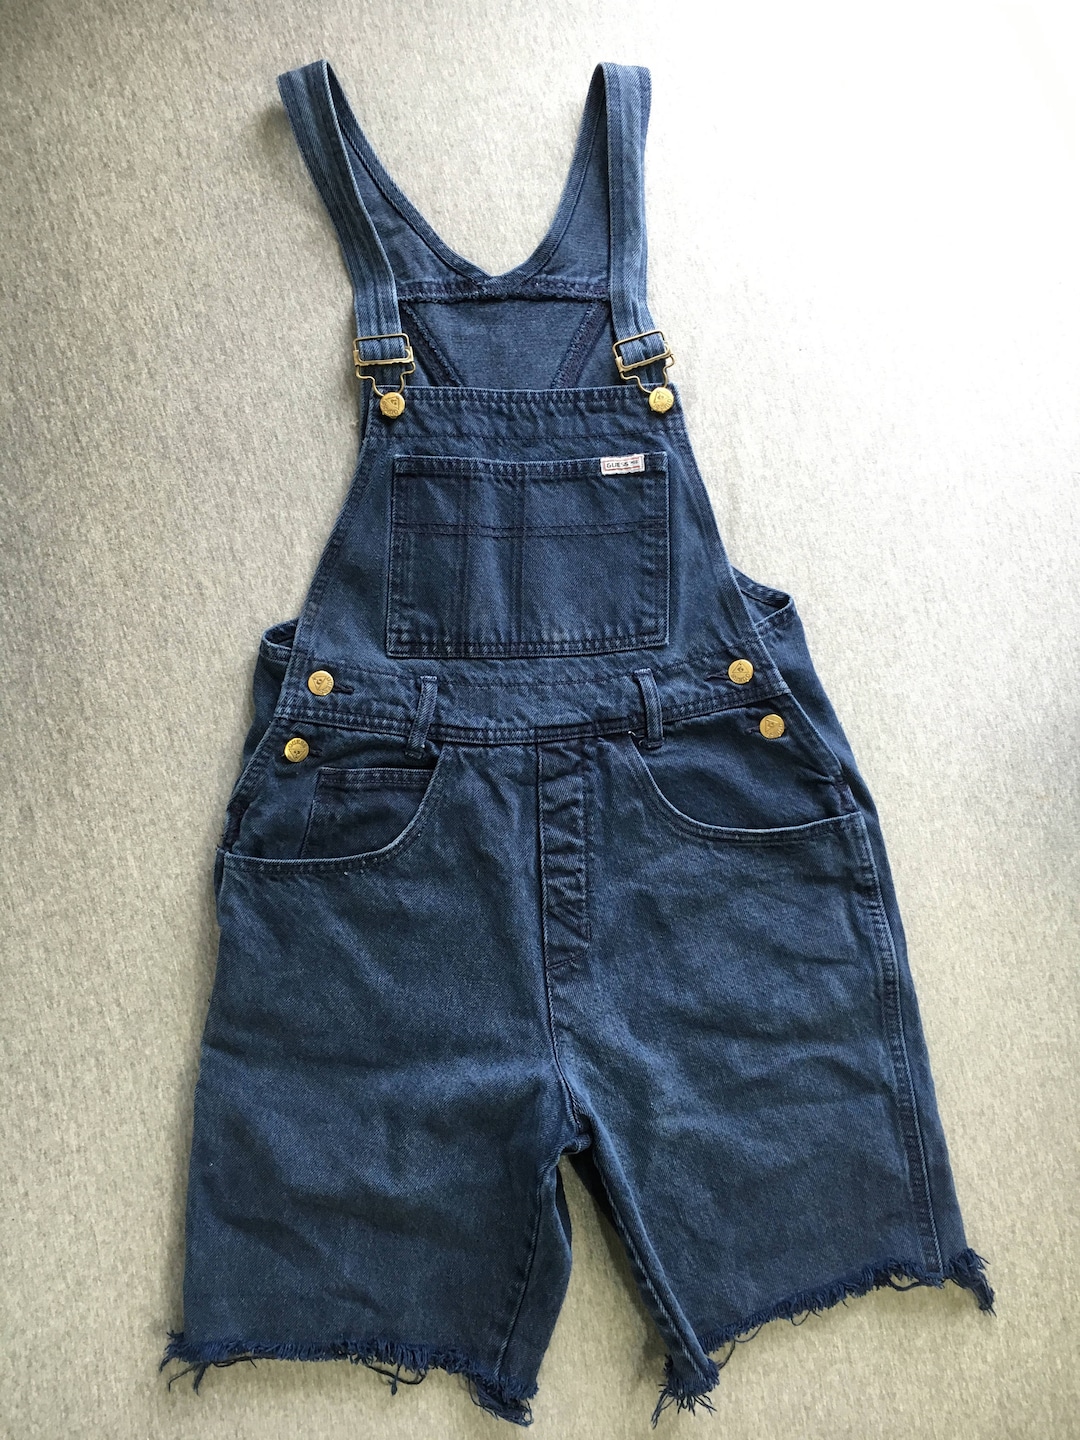 GUESS OVERALLS 80's Vintage DENIM/ Georges Marciano Jeans Bib Shorts ...